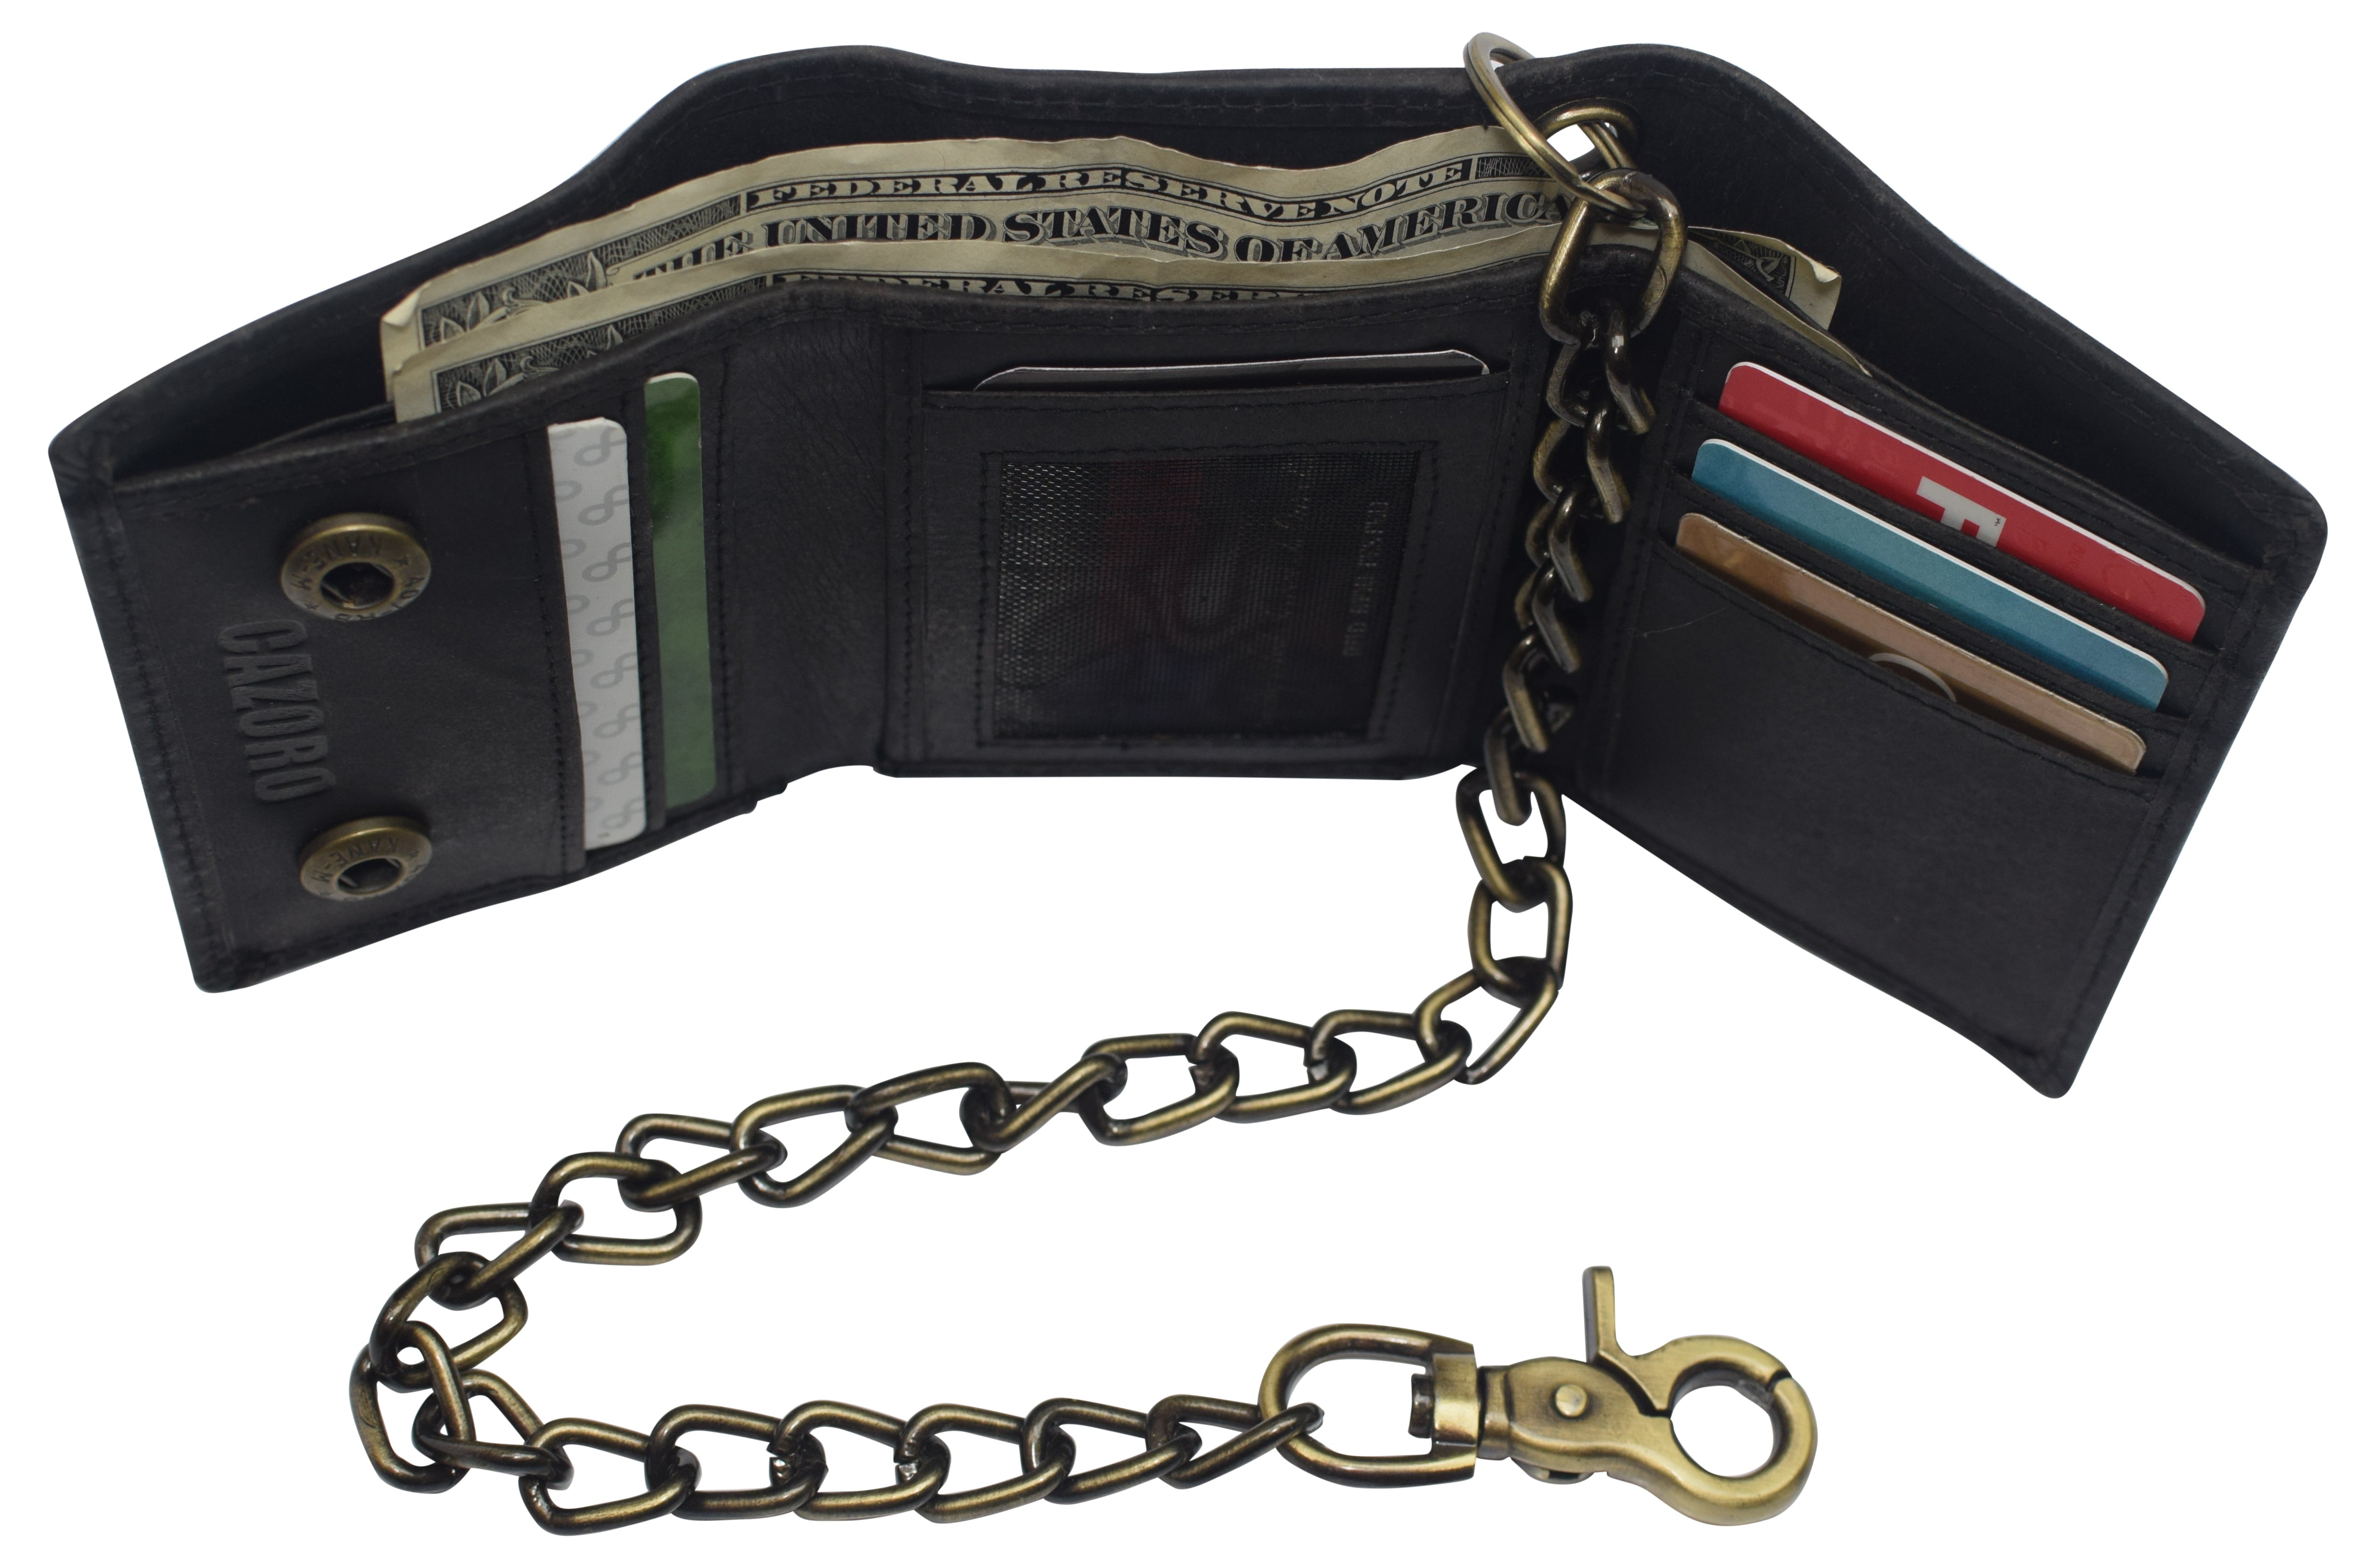 CTM® Men's Colorado Leather RFID Trifold Chain Wallet